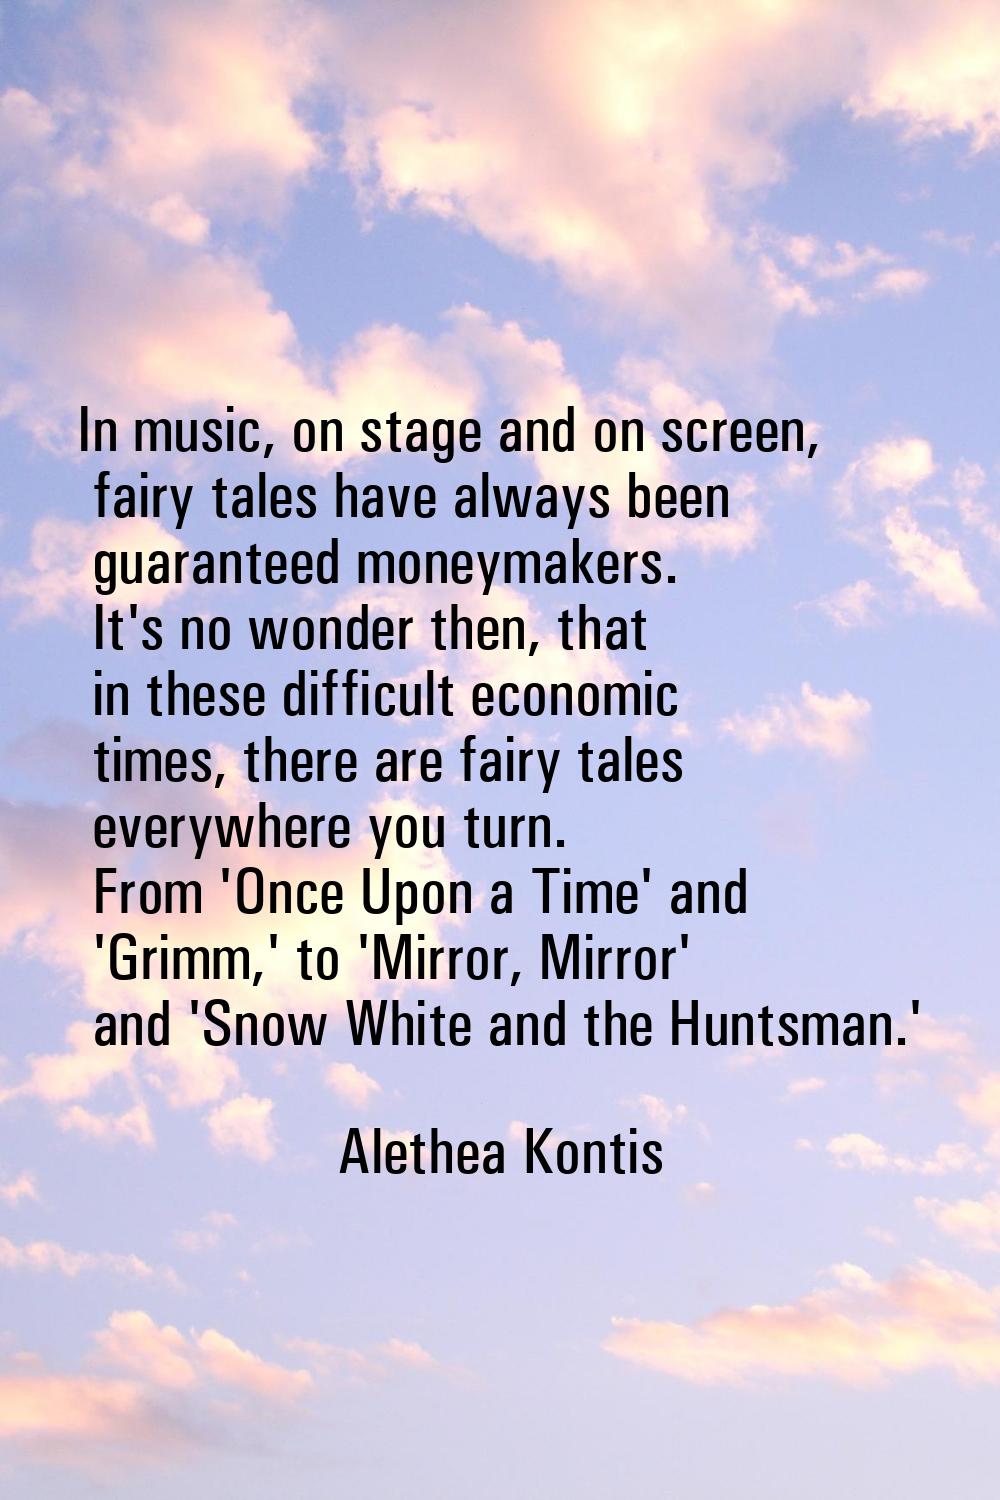 In music, on stage and on screen, fairy tales have always been guaranteed moneymakers. It's no wond